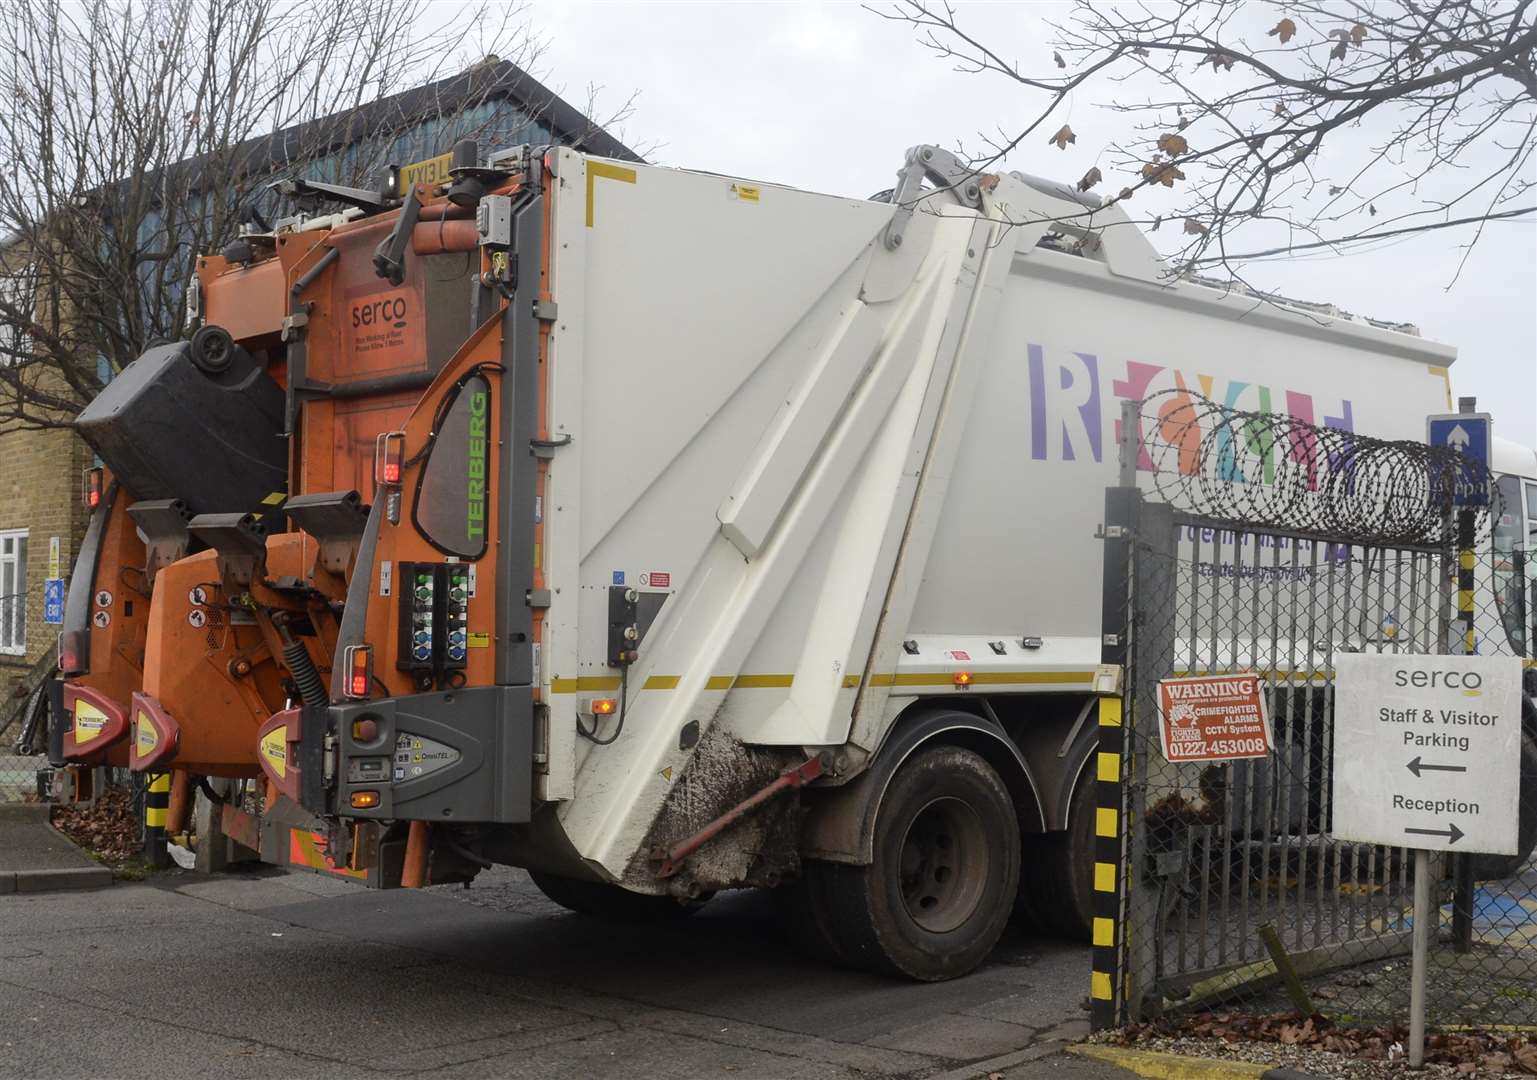 A new report has revealed the number of missed bin collections is dropping - but not by enough